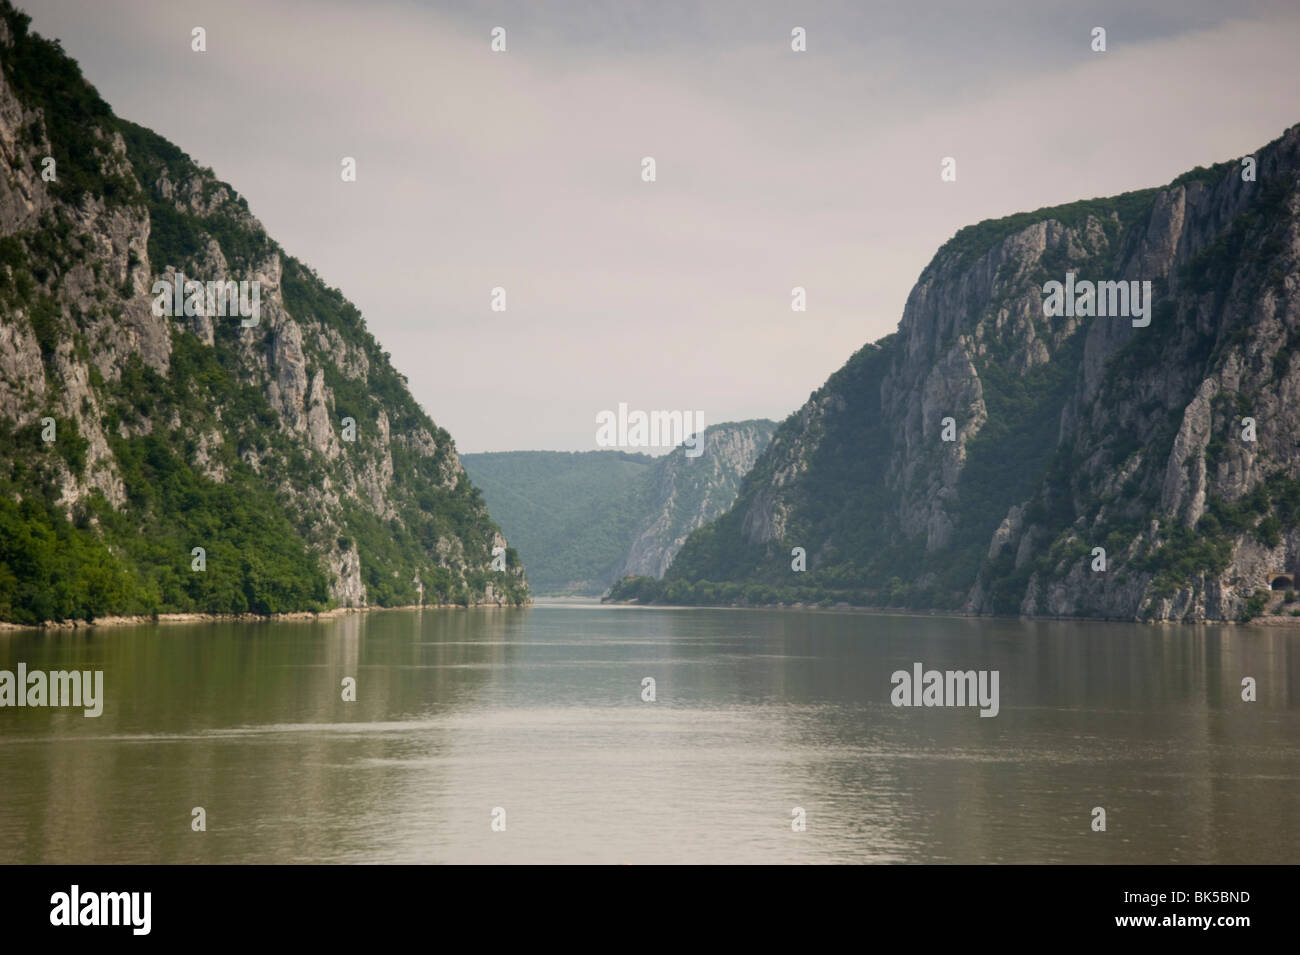 The Danube River flowing through the Kazan Gorge in the Iron Gates Region between Serbia and Romania, Europe Stock Photo